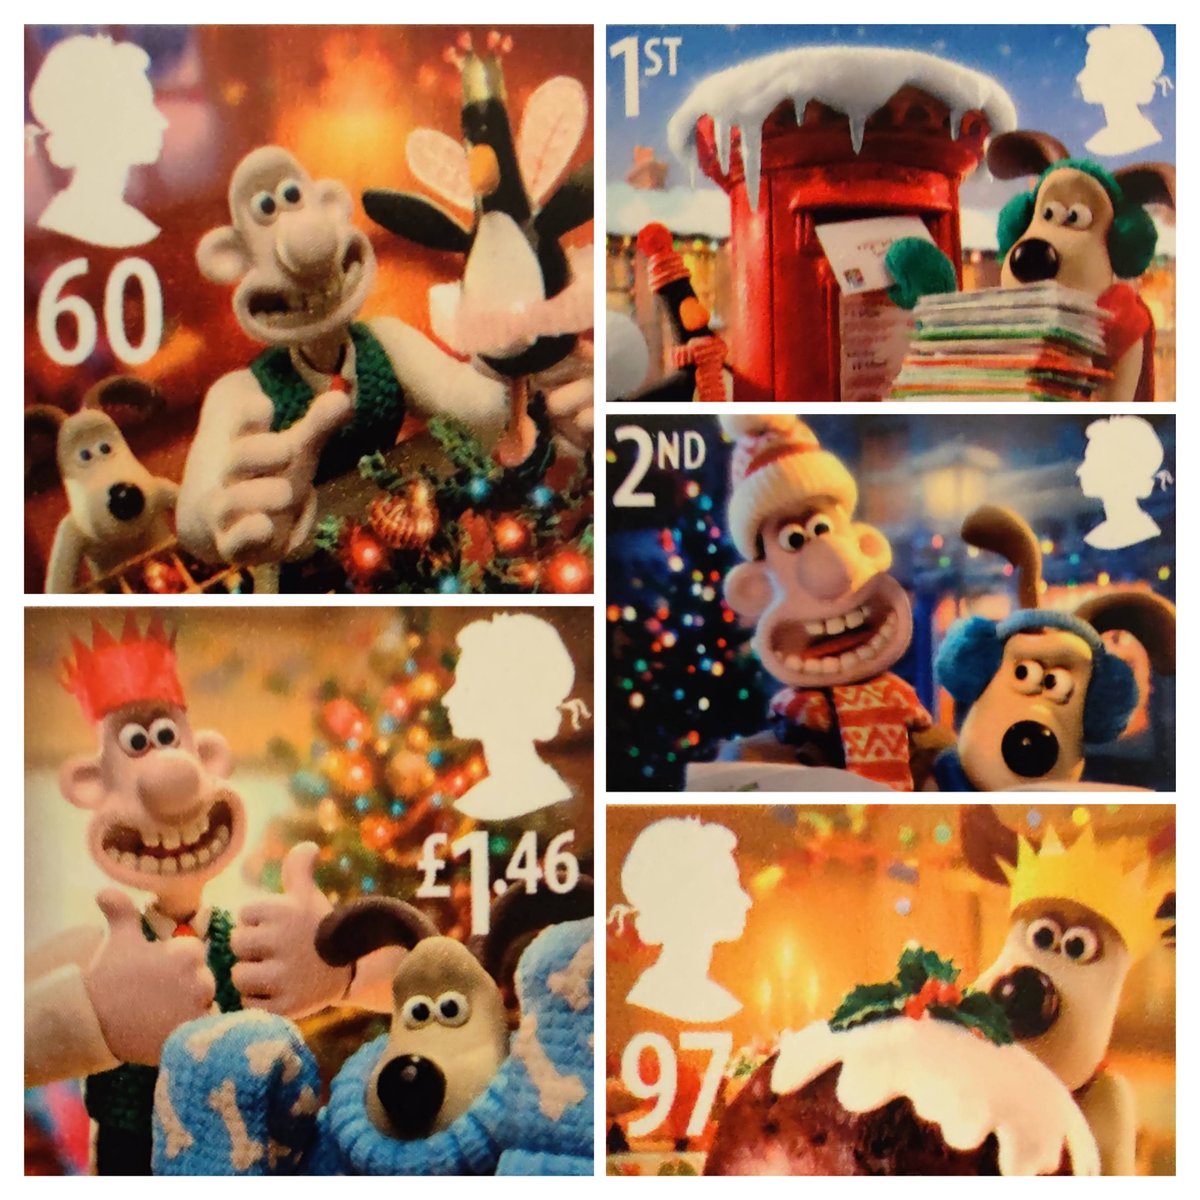 2010's Christmas stamps celebrated Christmas with Wallace and Gromit #stamps #christmasstamps #philately #wallaceandgromit